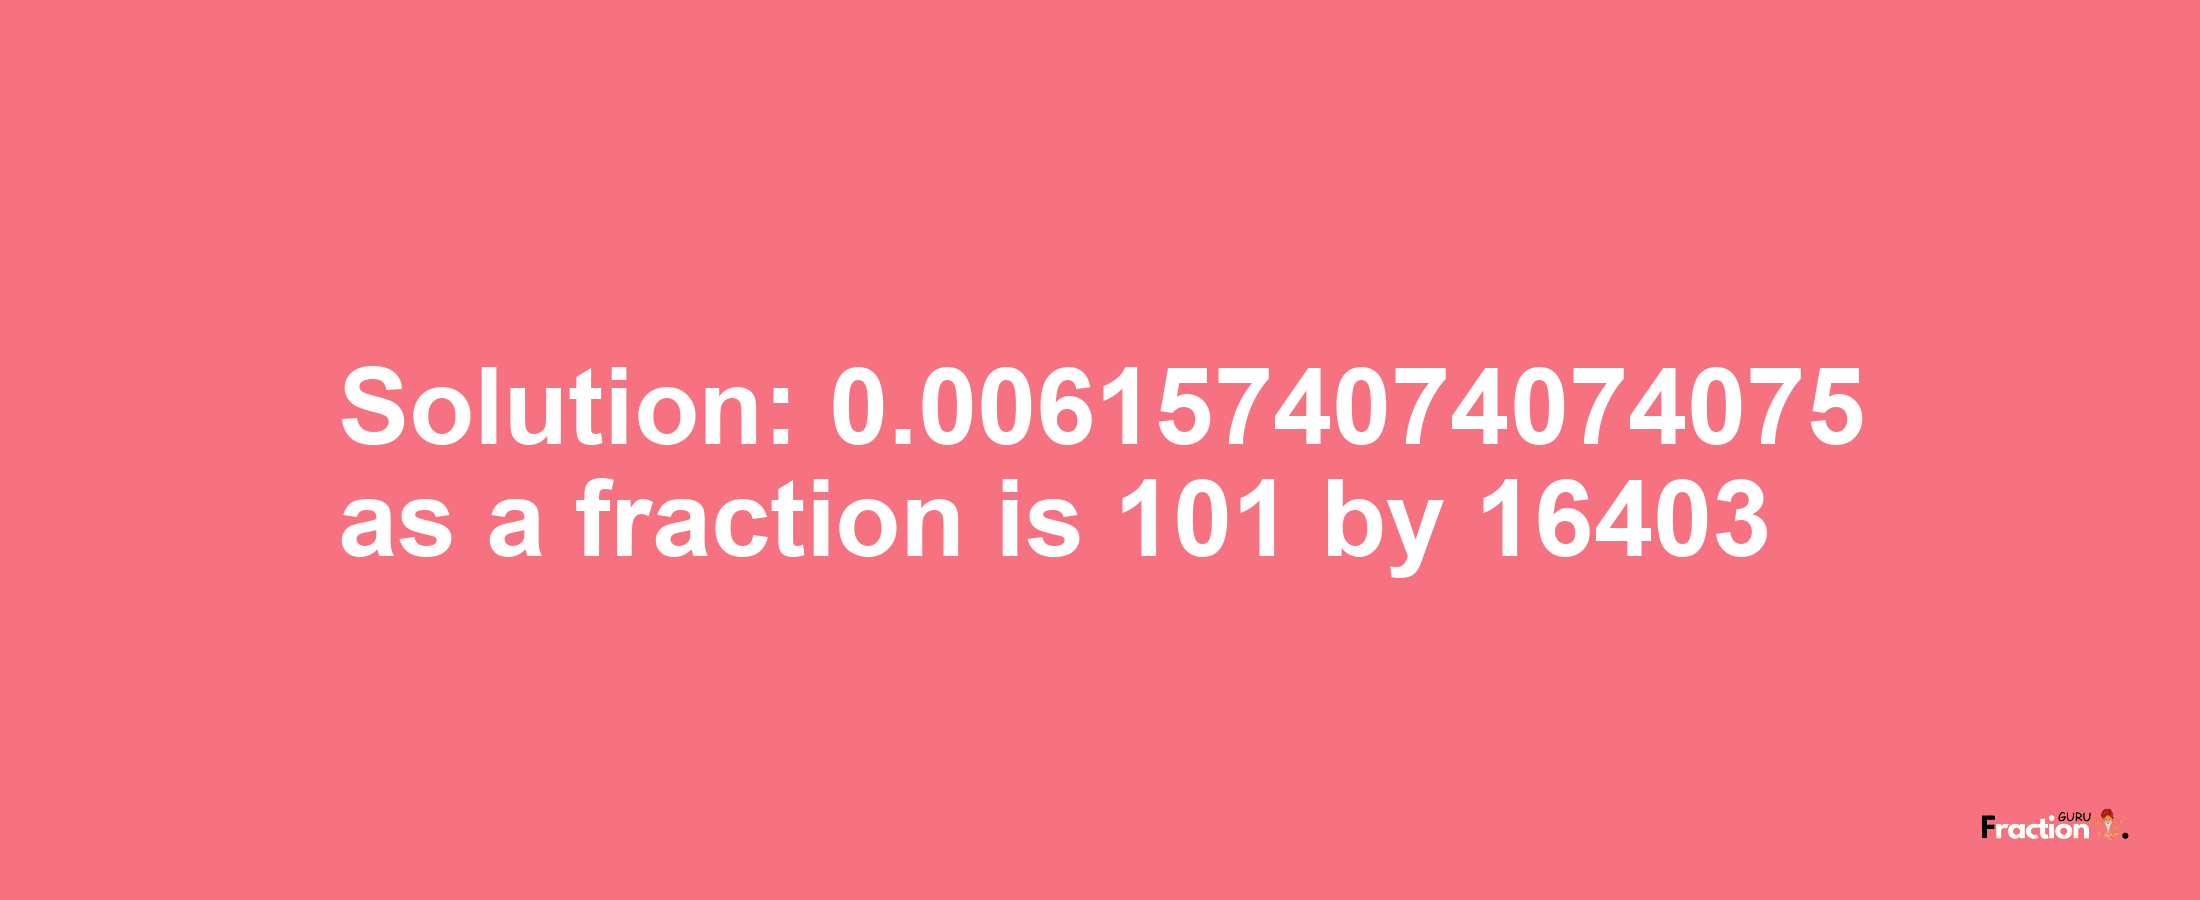 Solution:0.0061574074074075 as a fraction is 101/16403